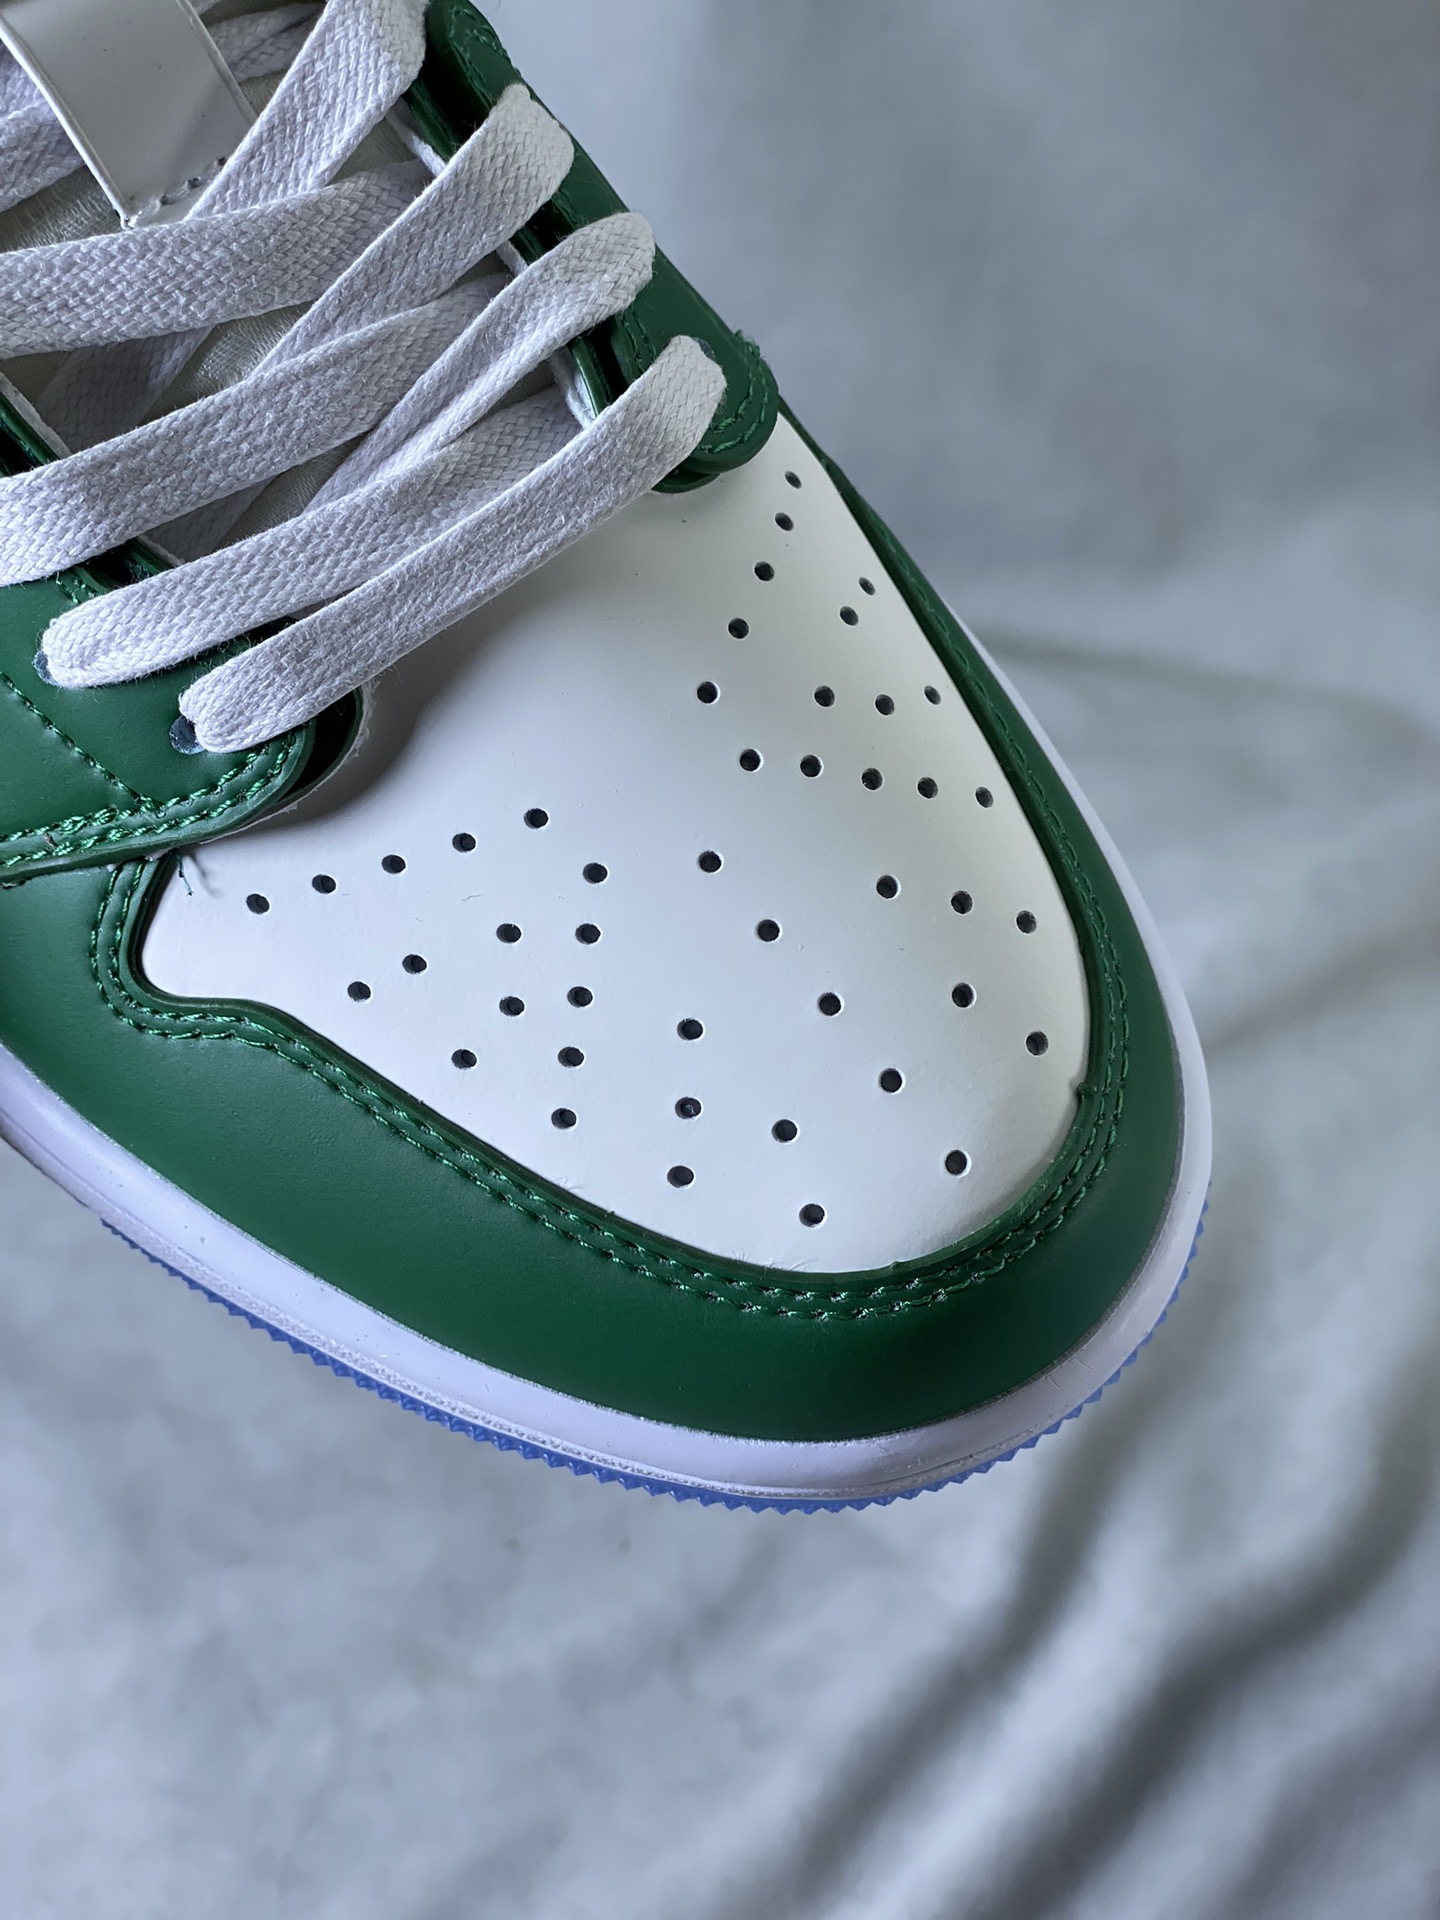 Authentic Nike Air Force 1 Dior in Ghana Myrtle Green Color Nexotincom